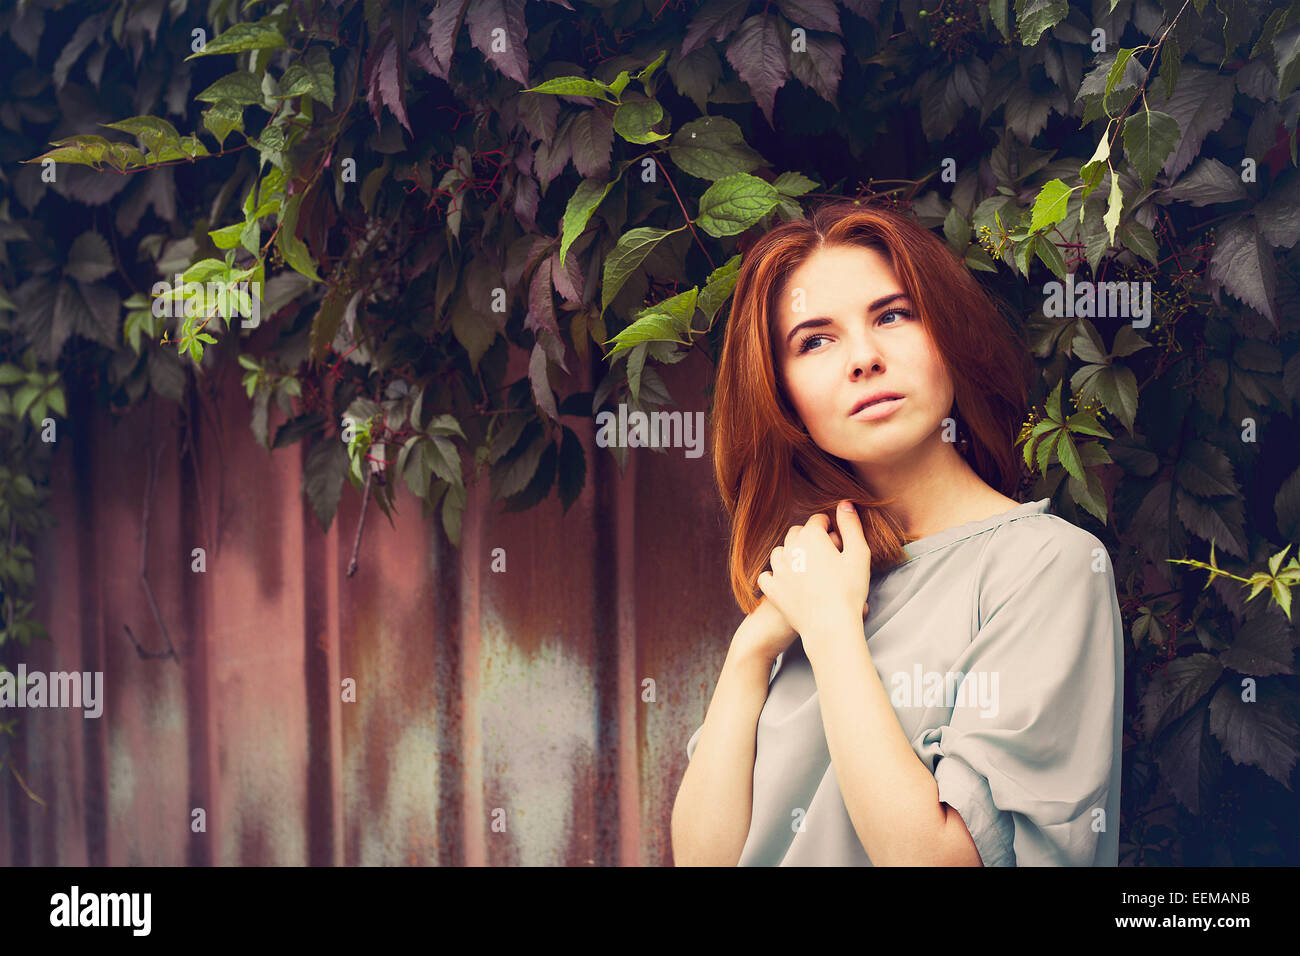 Caucasian woman standing under leaves by fence Stock Photo